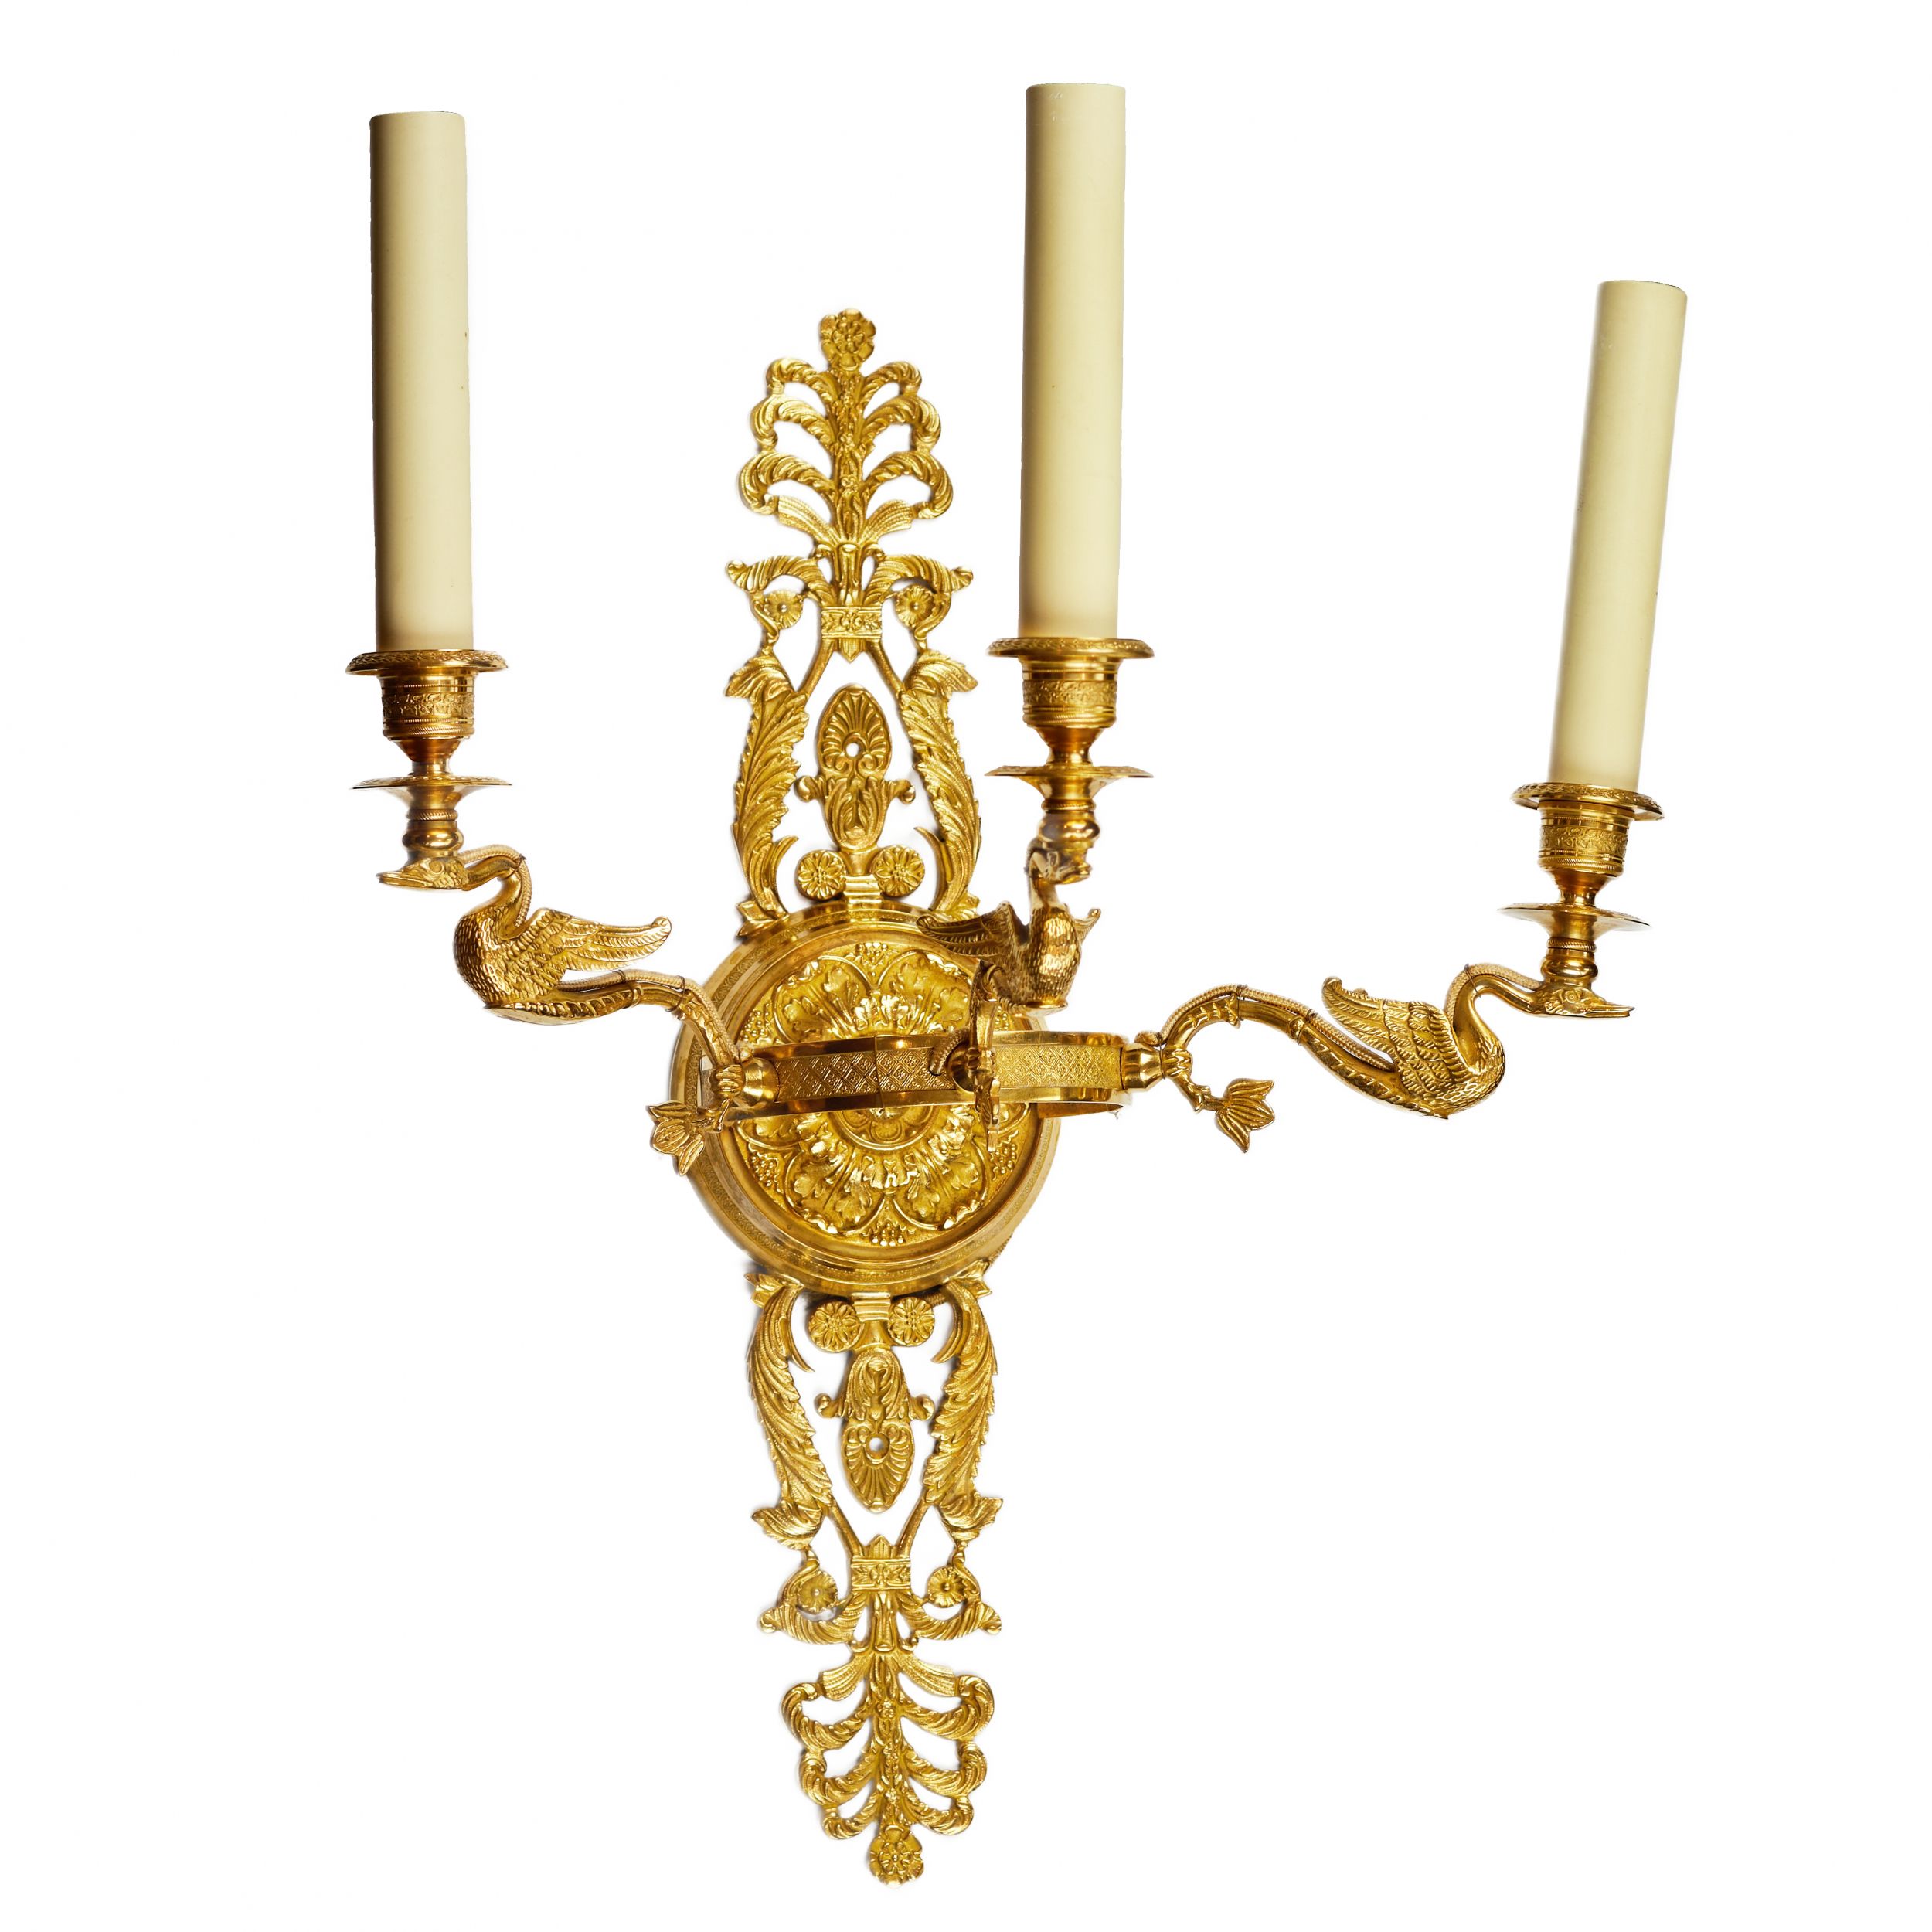 Six gilded bronze wall sconces with a Swan motif. France 20th century - Image 5 of 6